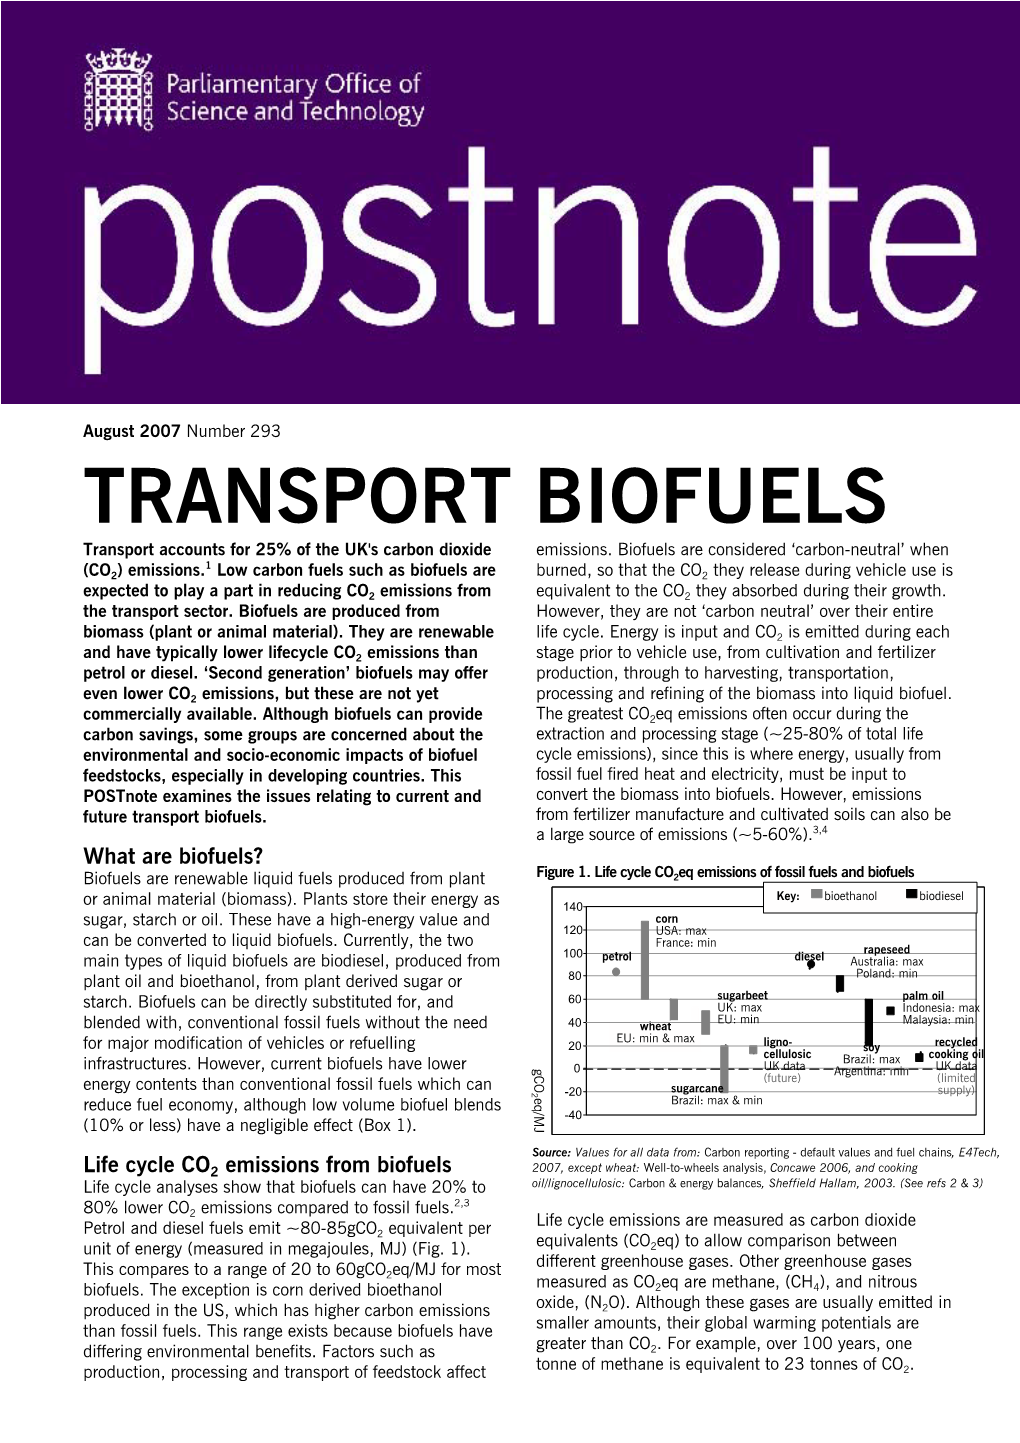 TRANSPORT BIOFUELS Transport Accounts for 25% of the UK's Carbon Dioxide Emissions